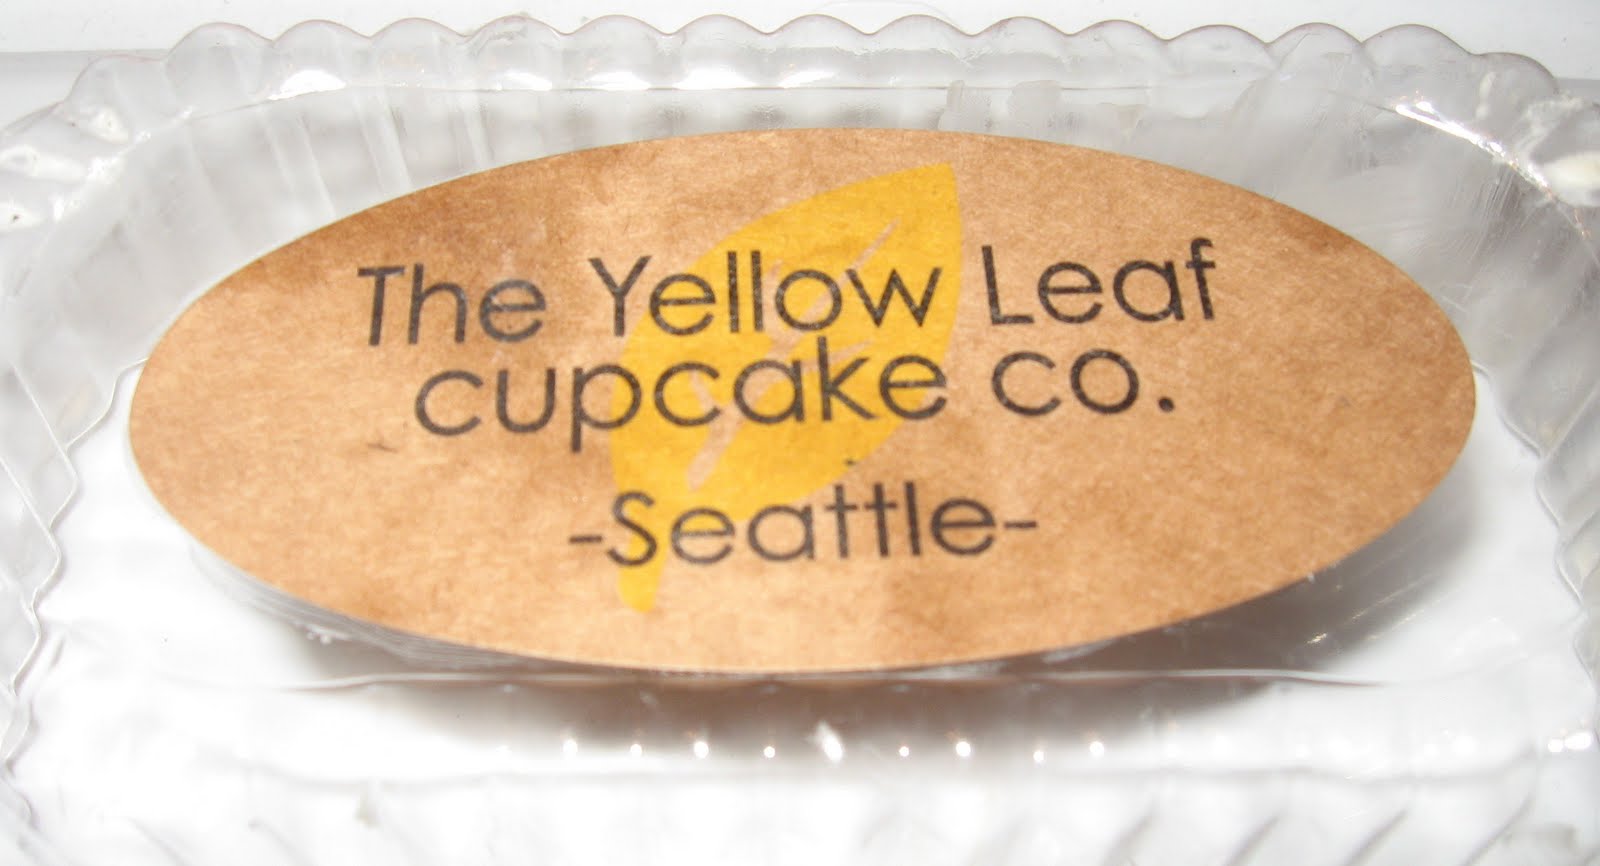 Yellow Leaf Cupcakes